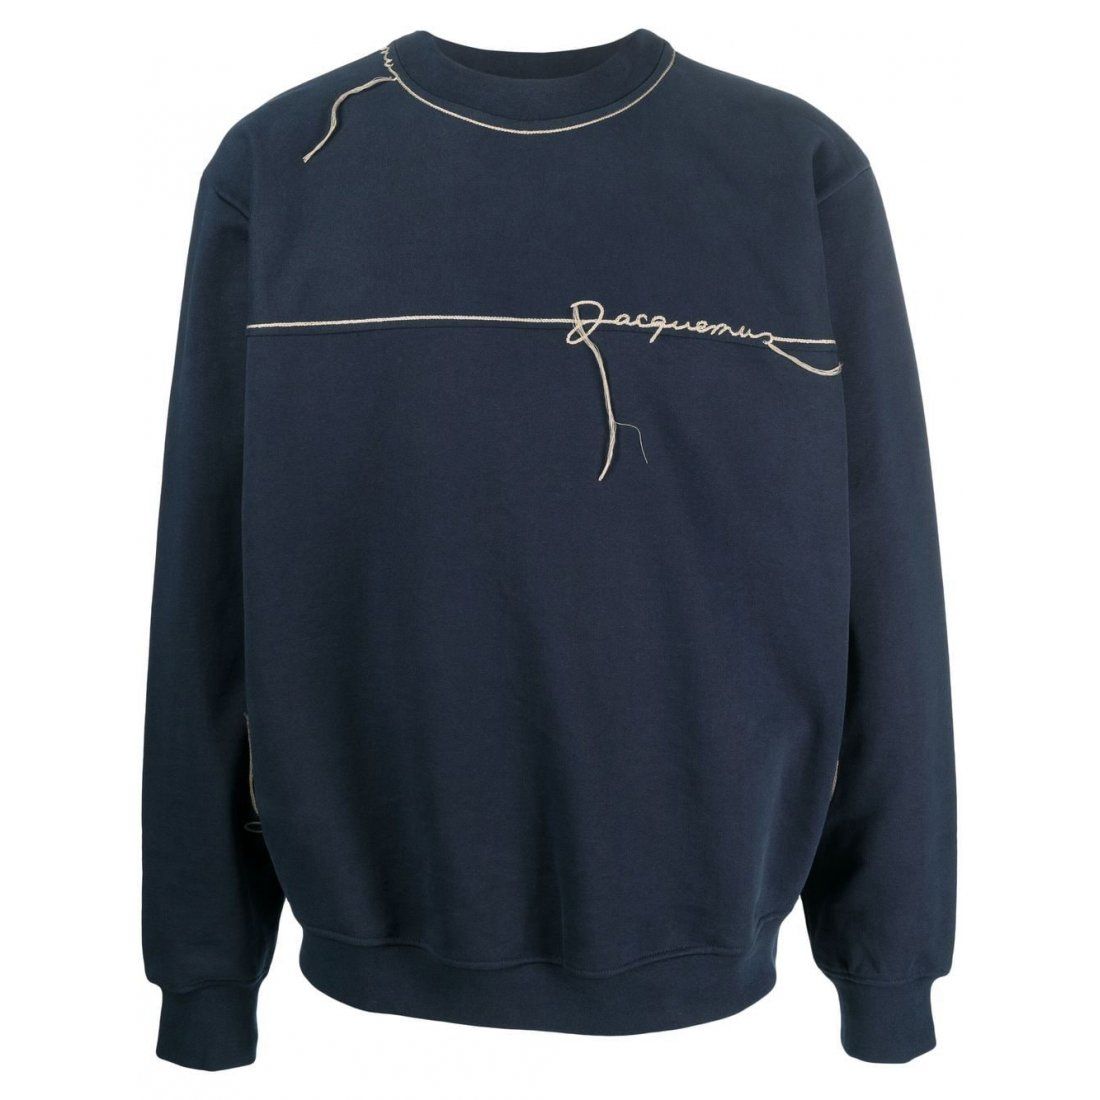 Jacquemus - Pull 'Le Fio Embroidered' pour Hommes